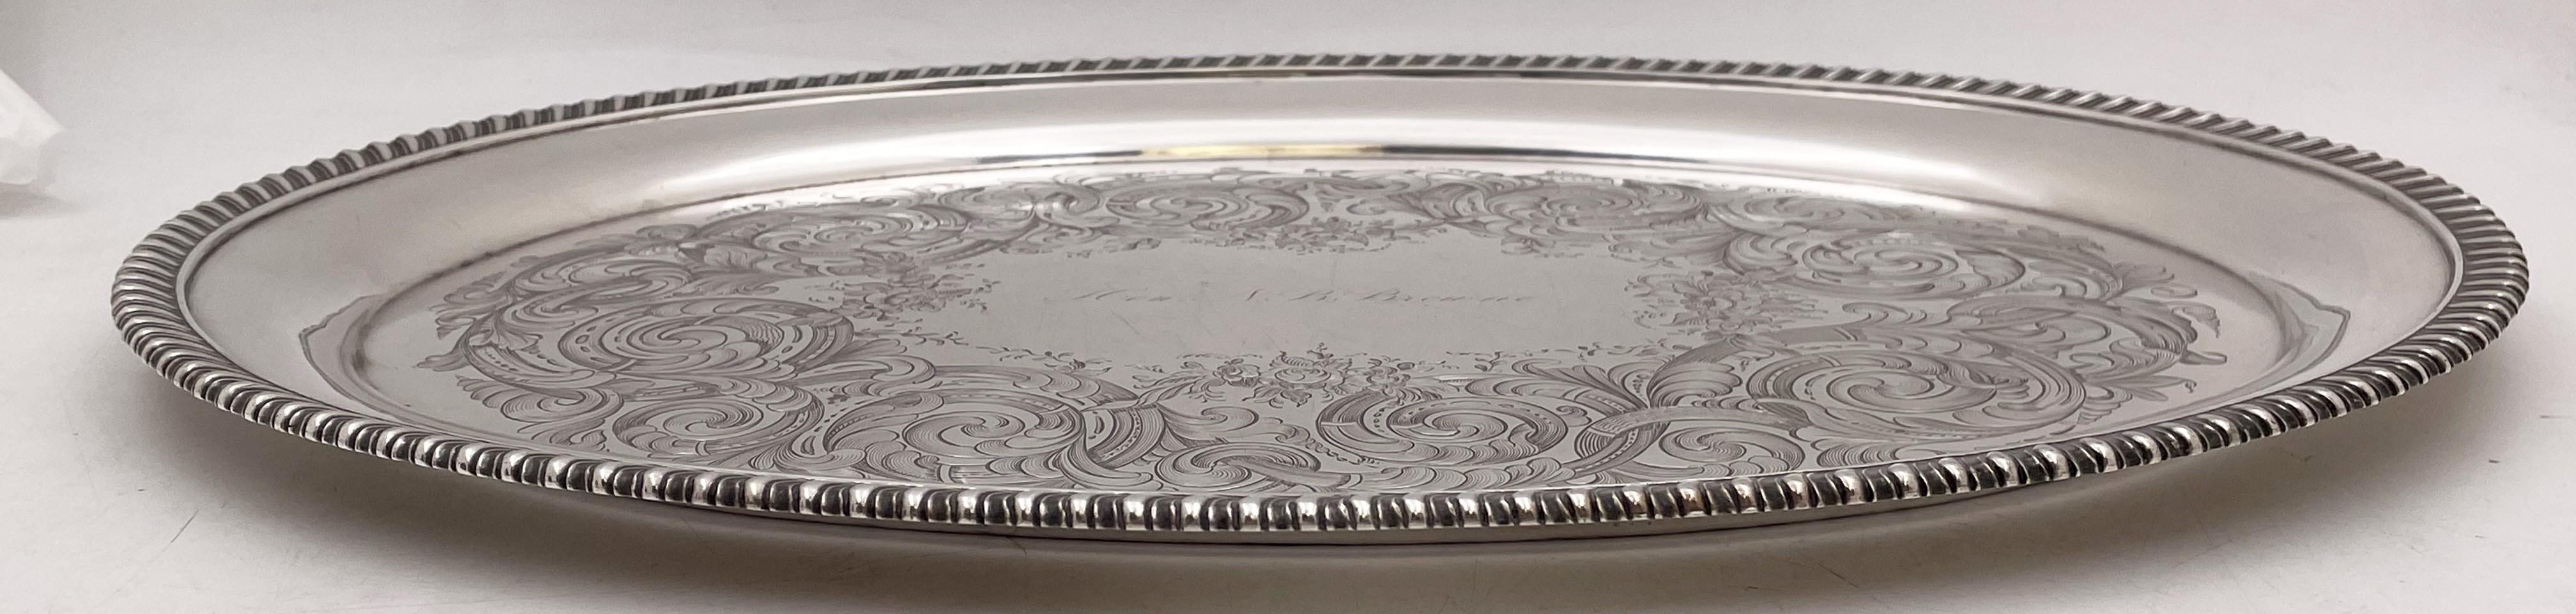 Wilson Silver Platter/ Tray from Mid-19th Century for Ivy League UPenn Alum In Good Condition For Sale In New York, NY